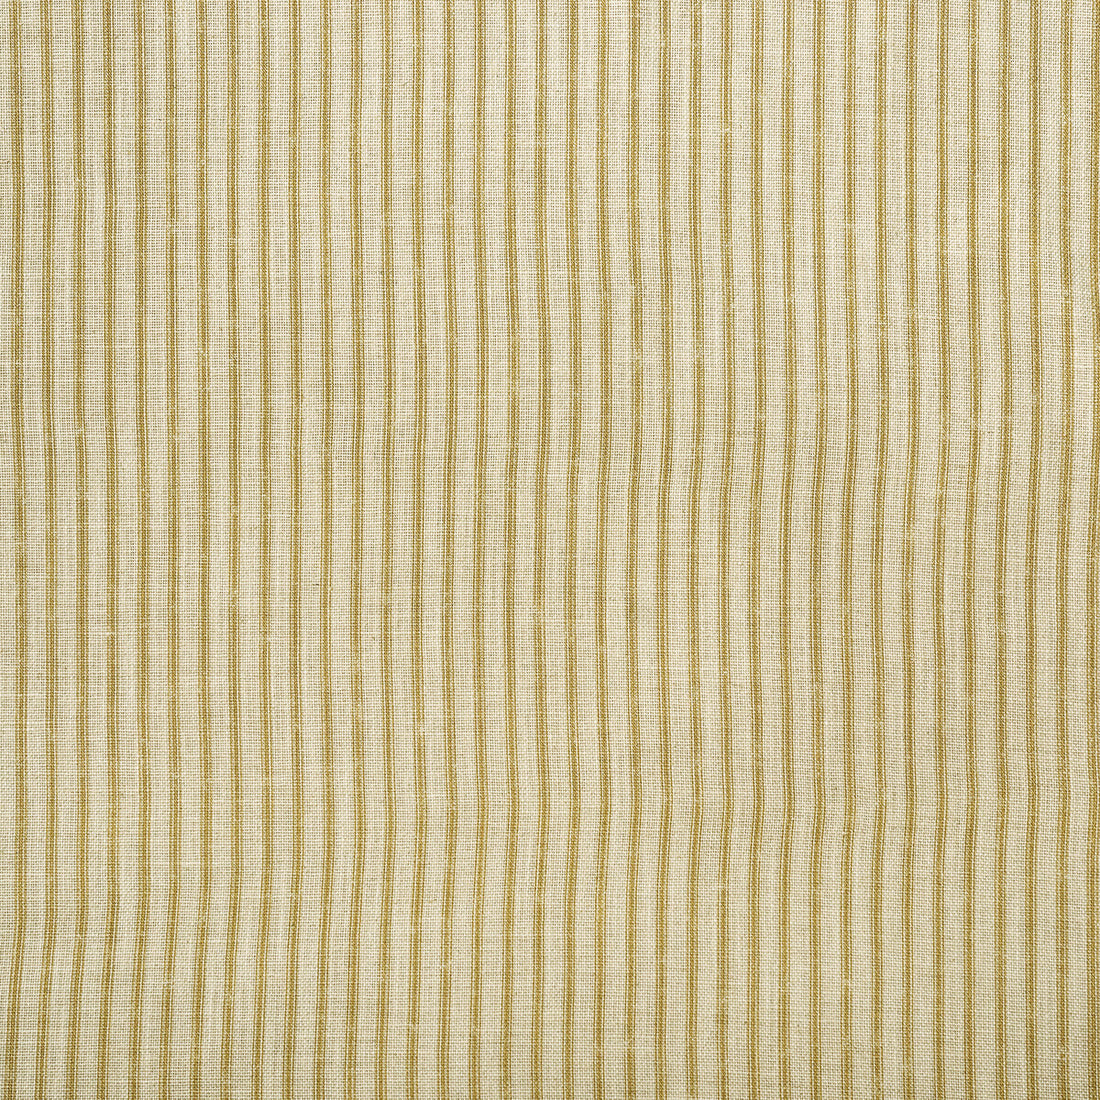 Picket fabric in honey color - pattern AM100382.416.0 - by Kravet Couture in the Andrew Martin Garden Path collection